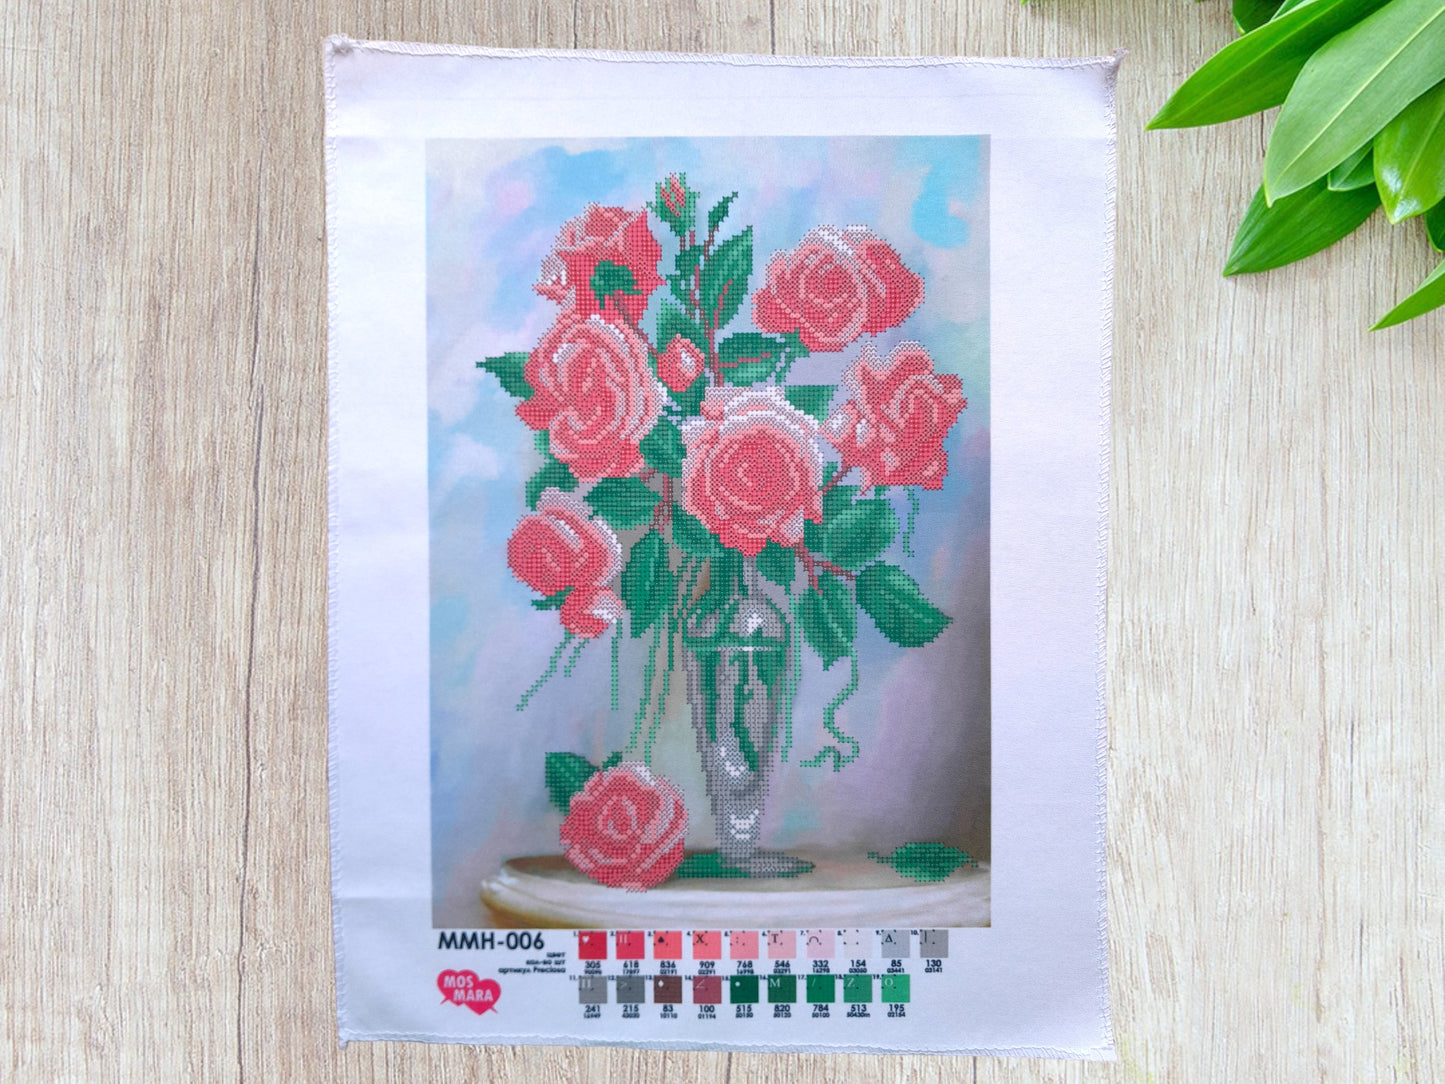 DIY Bead embroidery kit "Pink roses". "Pinks roses", size: 9.8-13.8in (25-35cm) - VadymShop